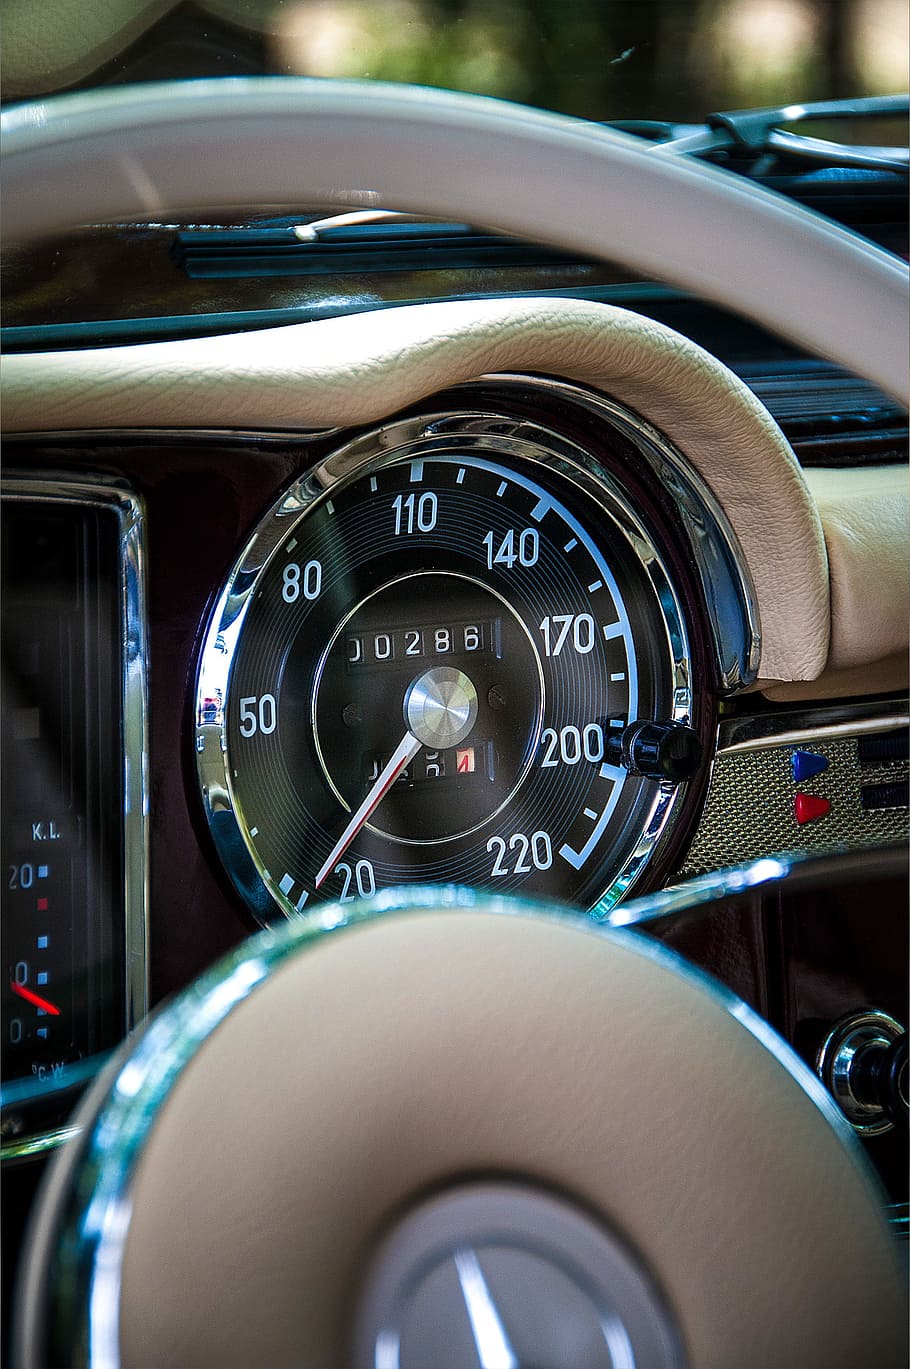 Auto, Vehicle, Car, mercédesz, speedometer, government, speed, oldtimer, skin, numbers